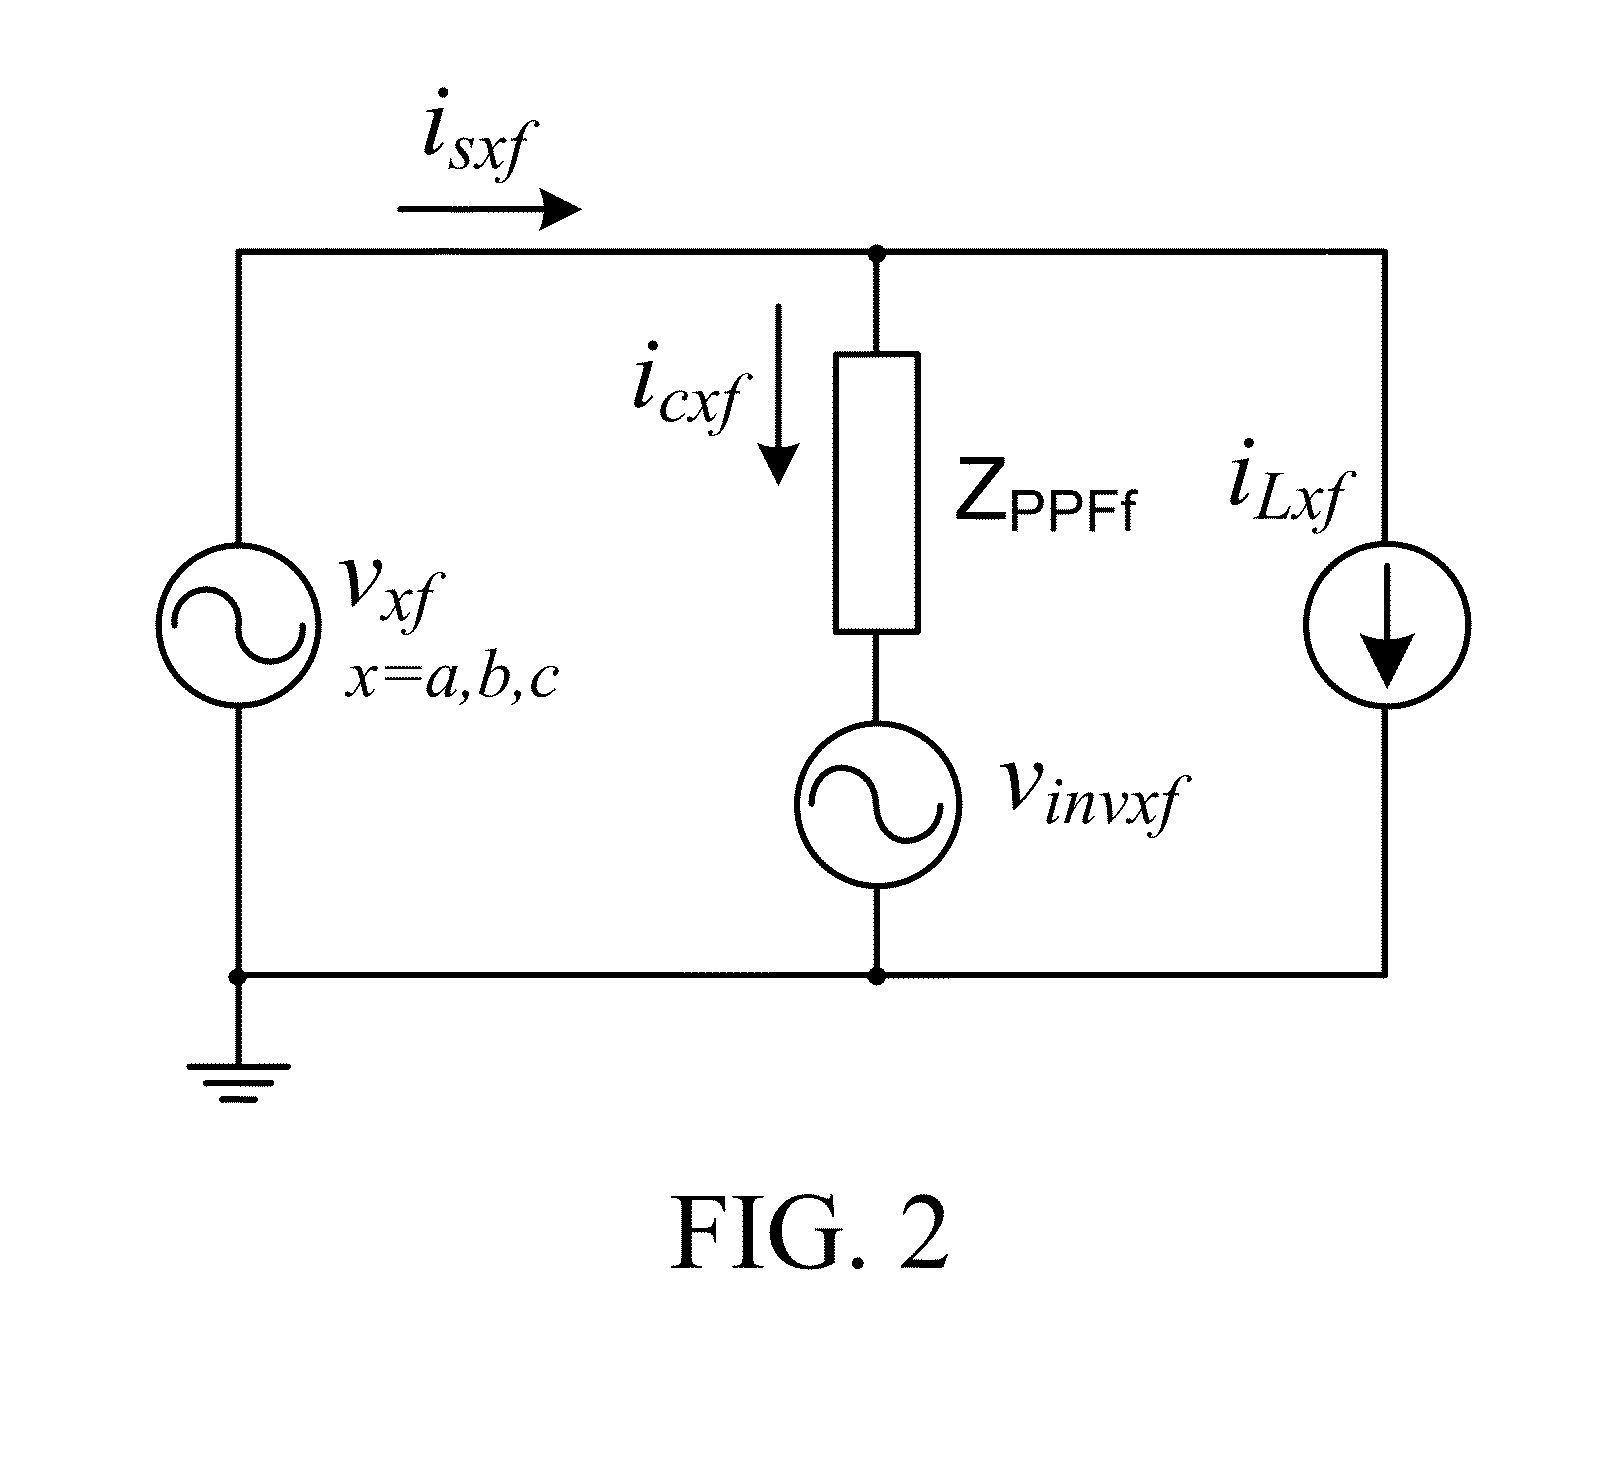 Adaptive DC-link voltage controlled LC coupling hybrid active power filters for reactive power compensation